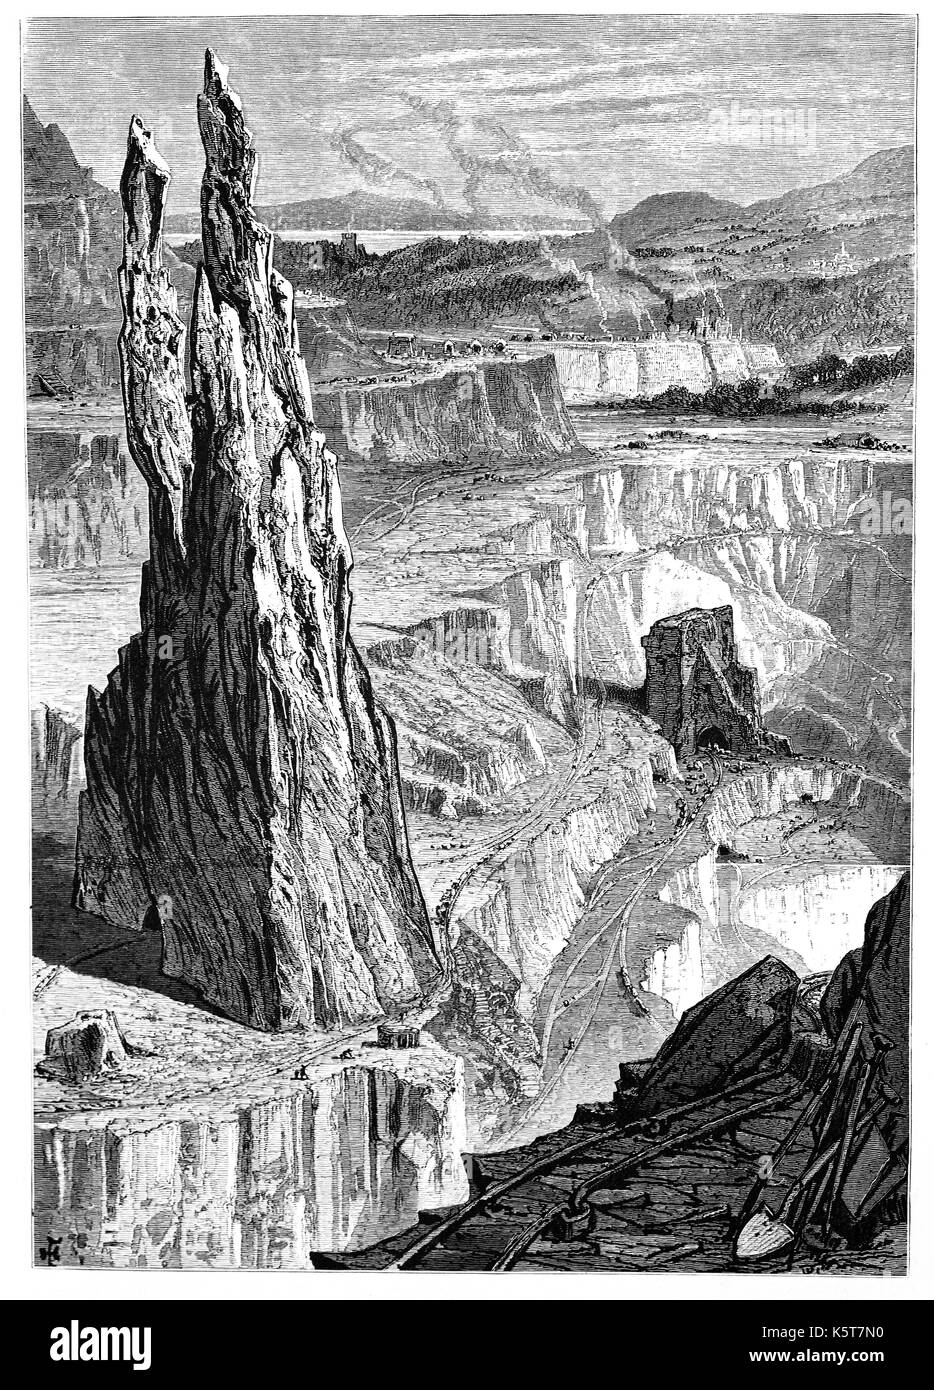 1870: The Penrhyn Slate Quarry, near Bethesda in Snowdonia,  Gwynedd, North Wales. At the end of the nineteenth century when this sketch was made it was the world's largest slate quarry.  The main pit is nearly 1 mile long and 1,200 feet deep, and it was worked by nearly 3,000 quarrymen Stock Photo